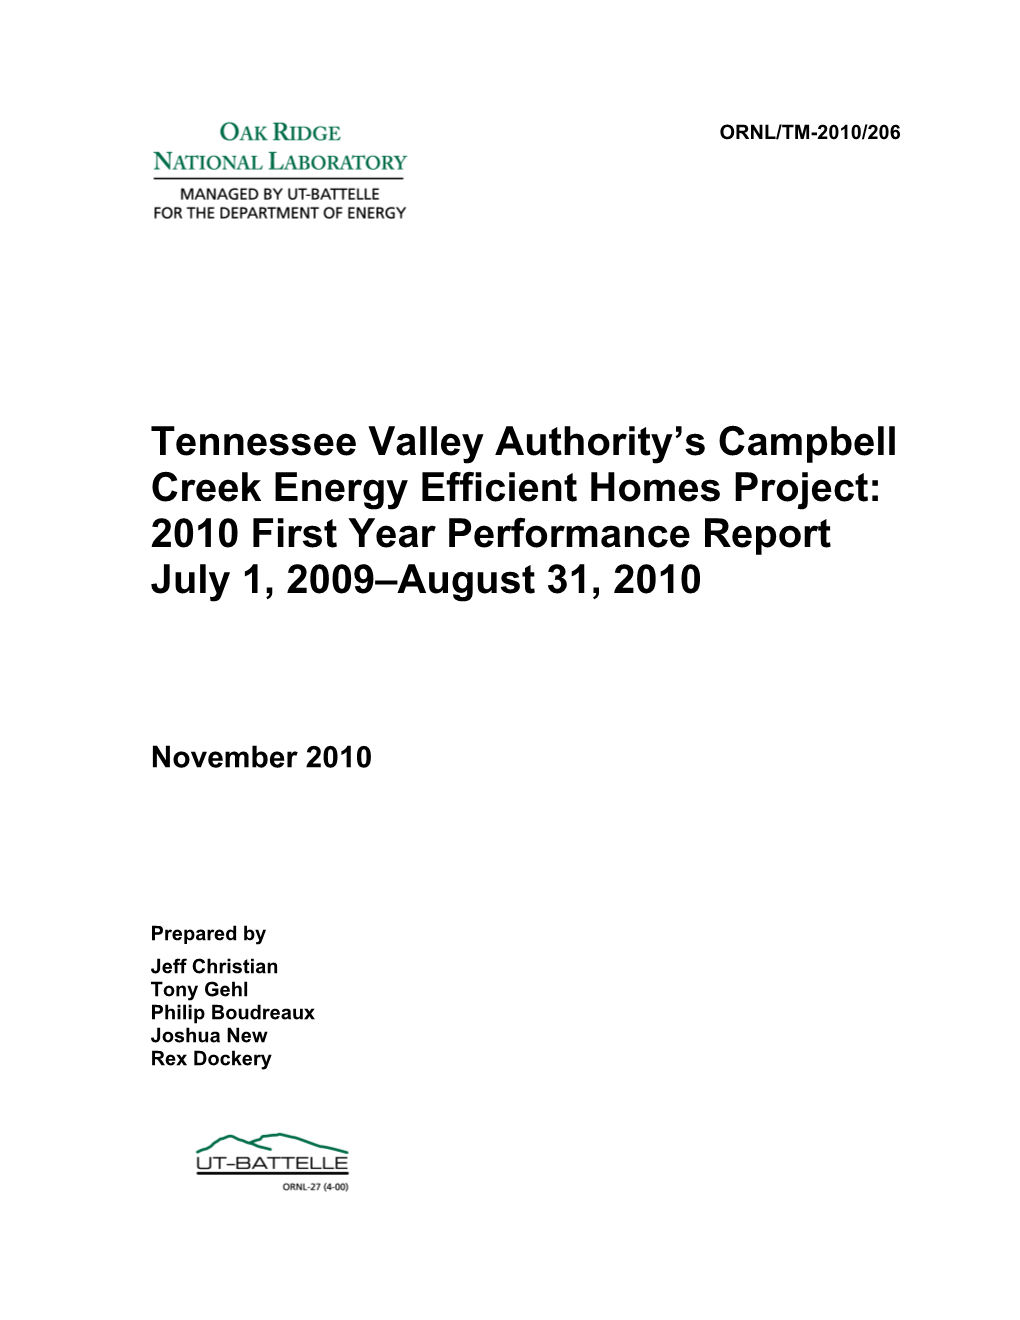 Tennessee Valley Authority's Campbell Creek Energy